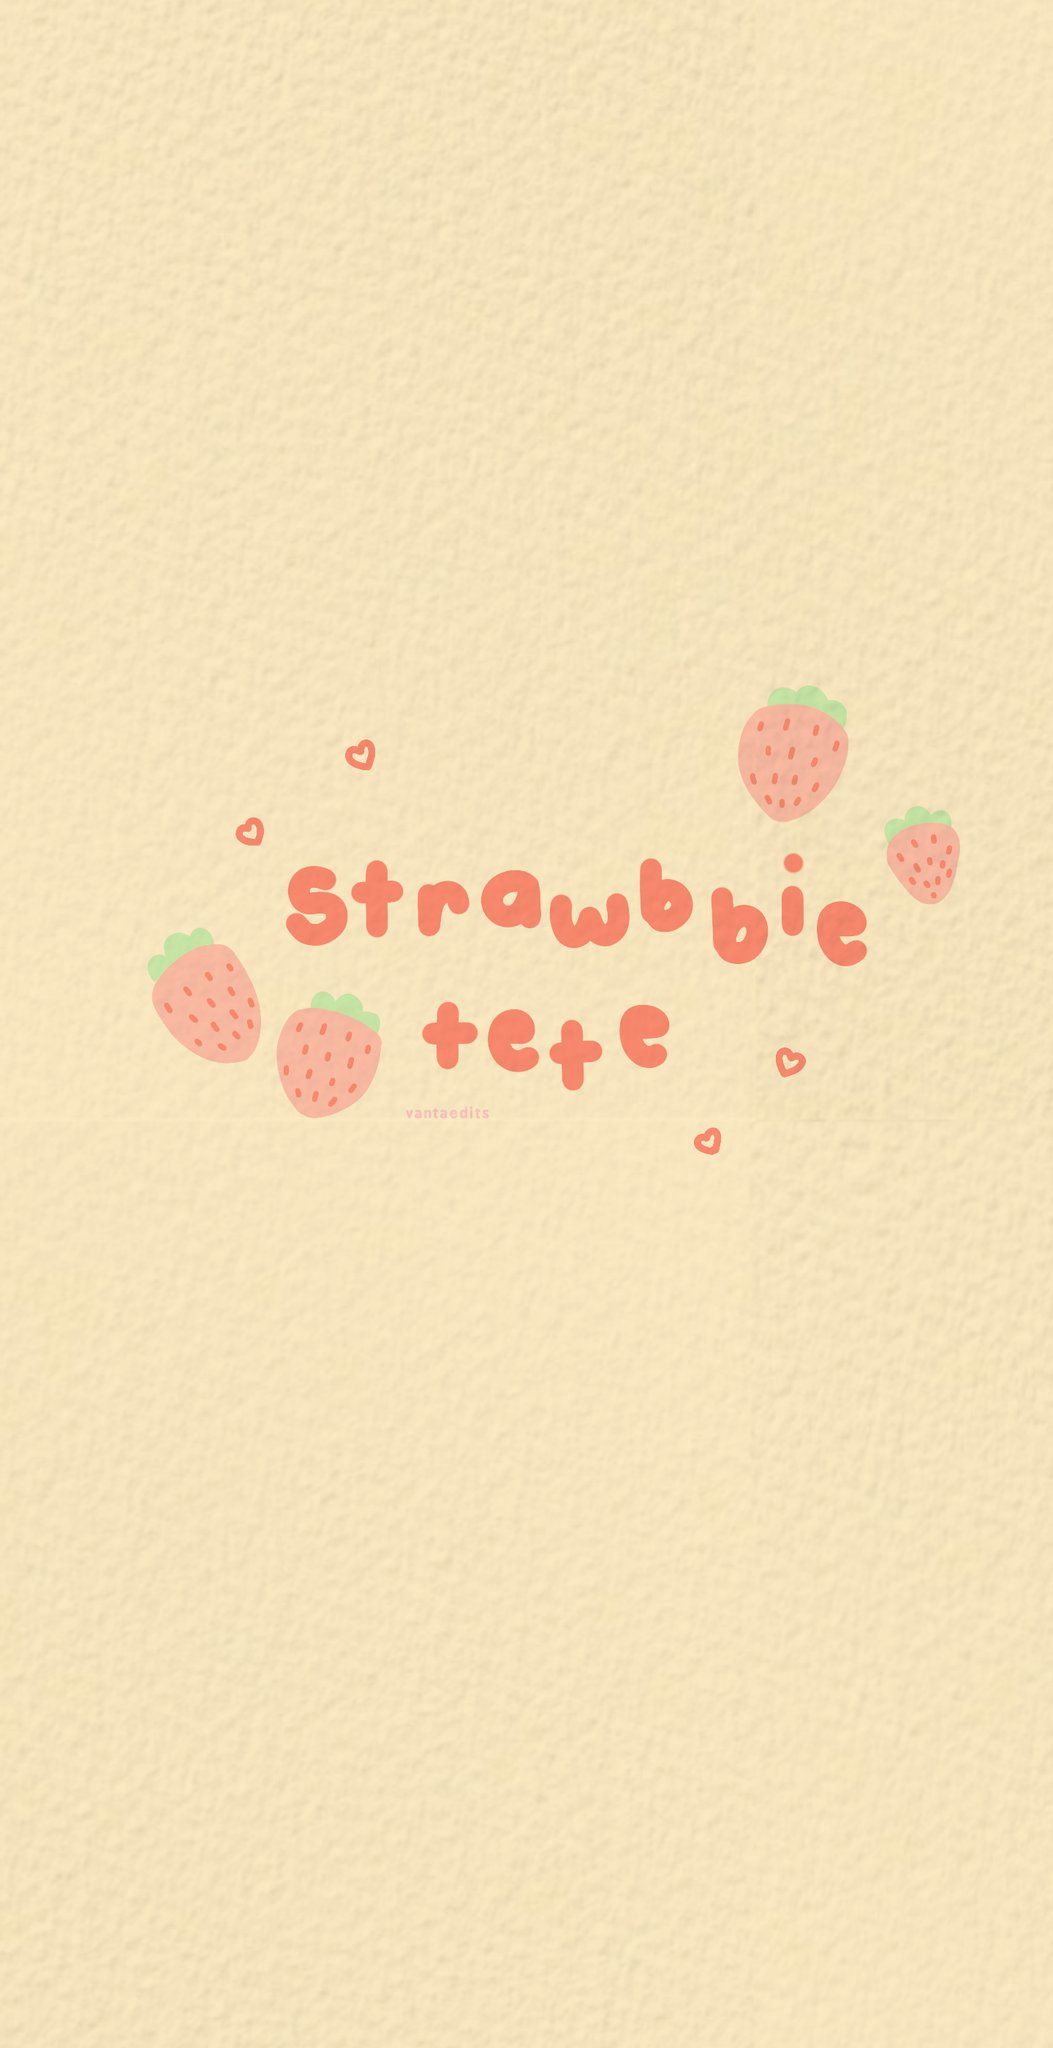 Aesthetic strawberry wallpaper for phone background with a pastel yellow background and pink strawberries. - Strawberry